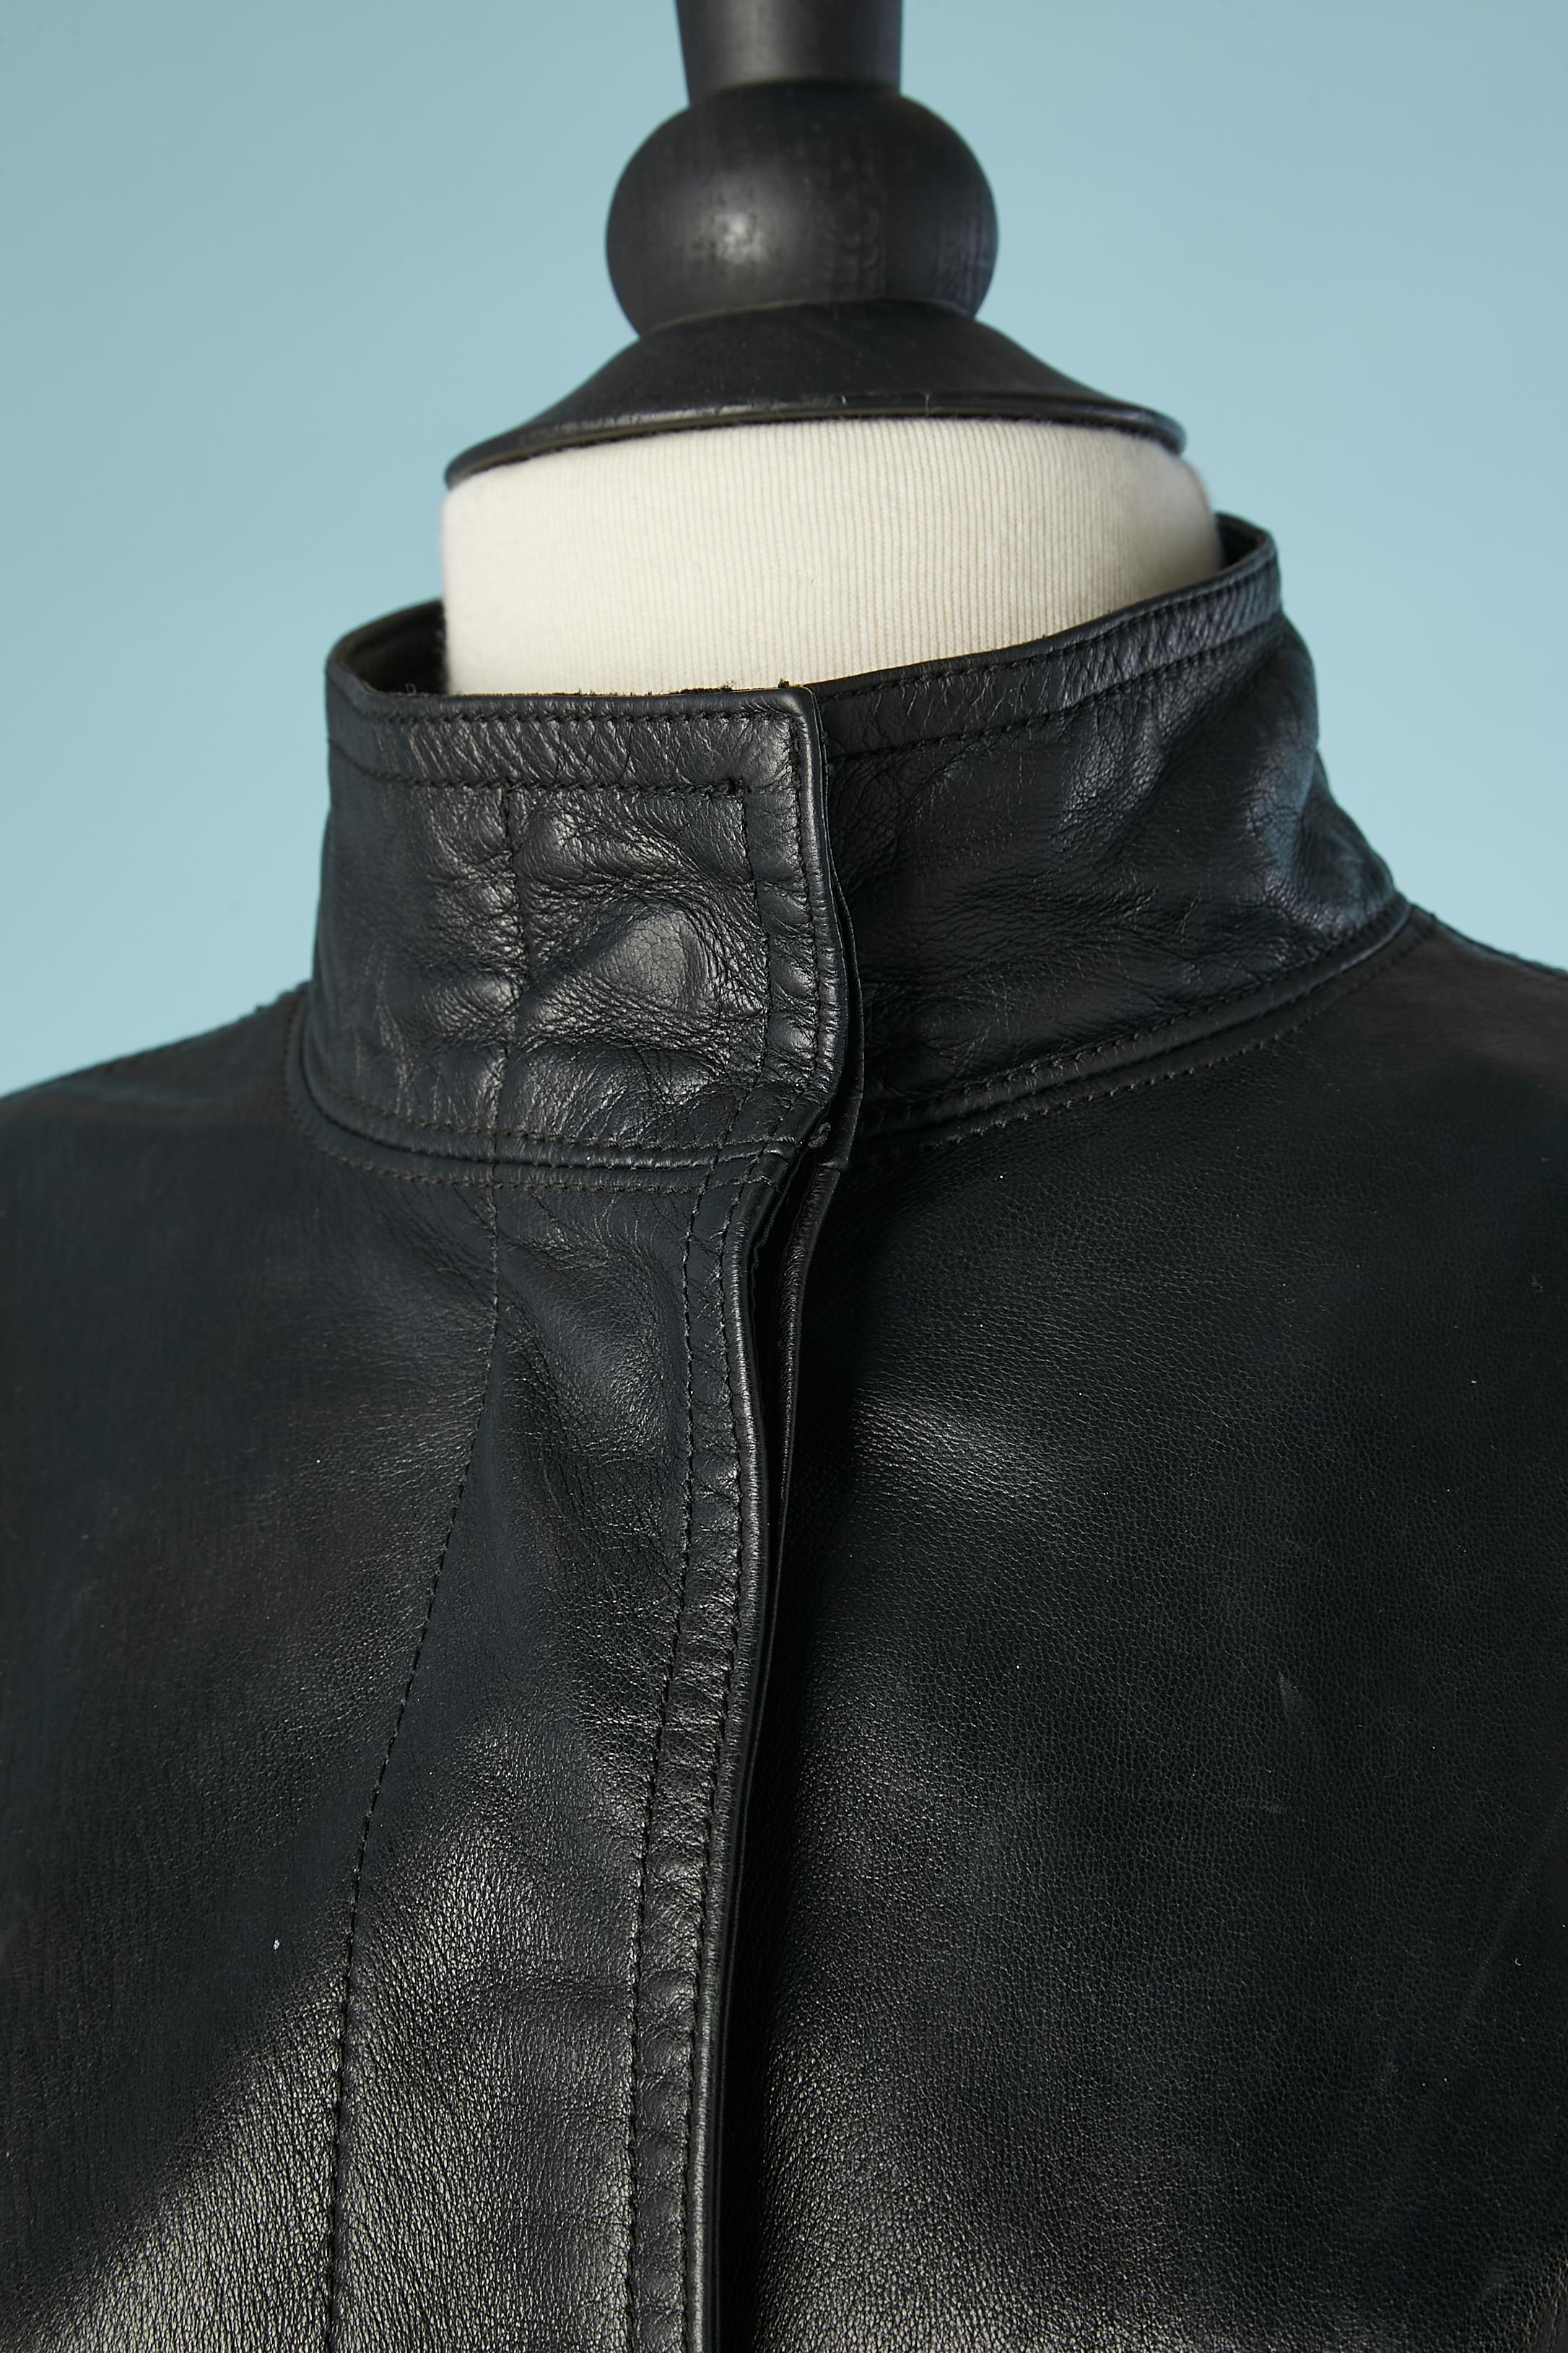 Leather coat with snap and wool lining ( there is no fabric tag so not sure it's wool, may be mix fabric but warm) 
Snaps in the middle front. 2 half-belt crossed in the middle back, adjustable with buckles. 
SIZE 40/42 ( Fr) L (Us) 